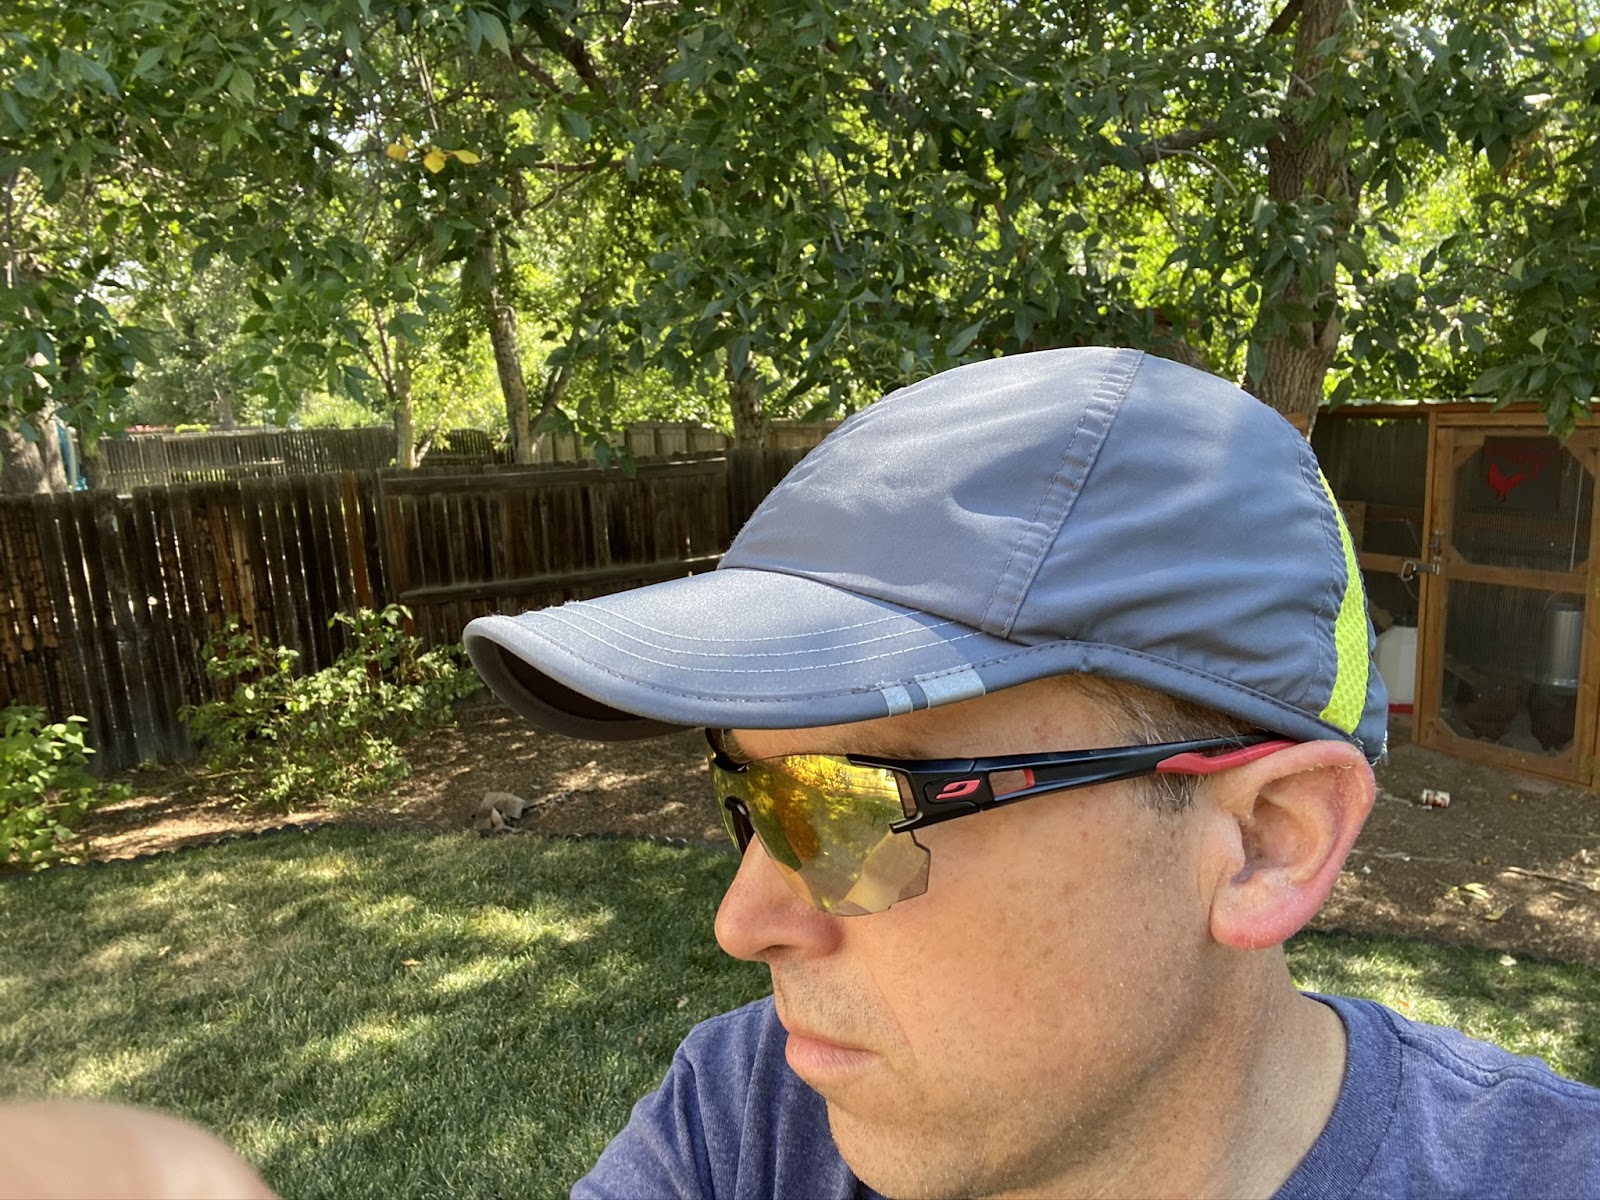 Road Trail Run: Sunday Afternoons Hats Review: The Best Hats. Period